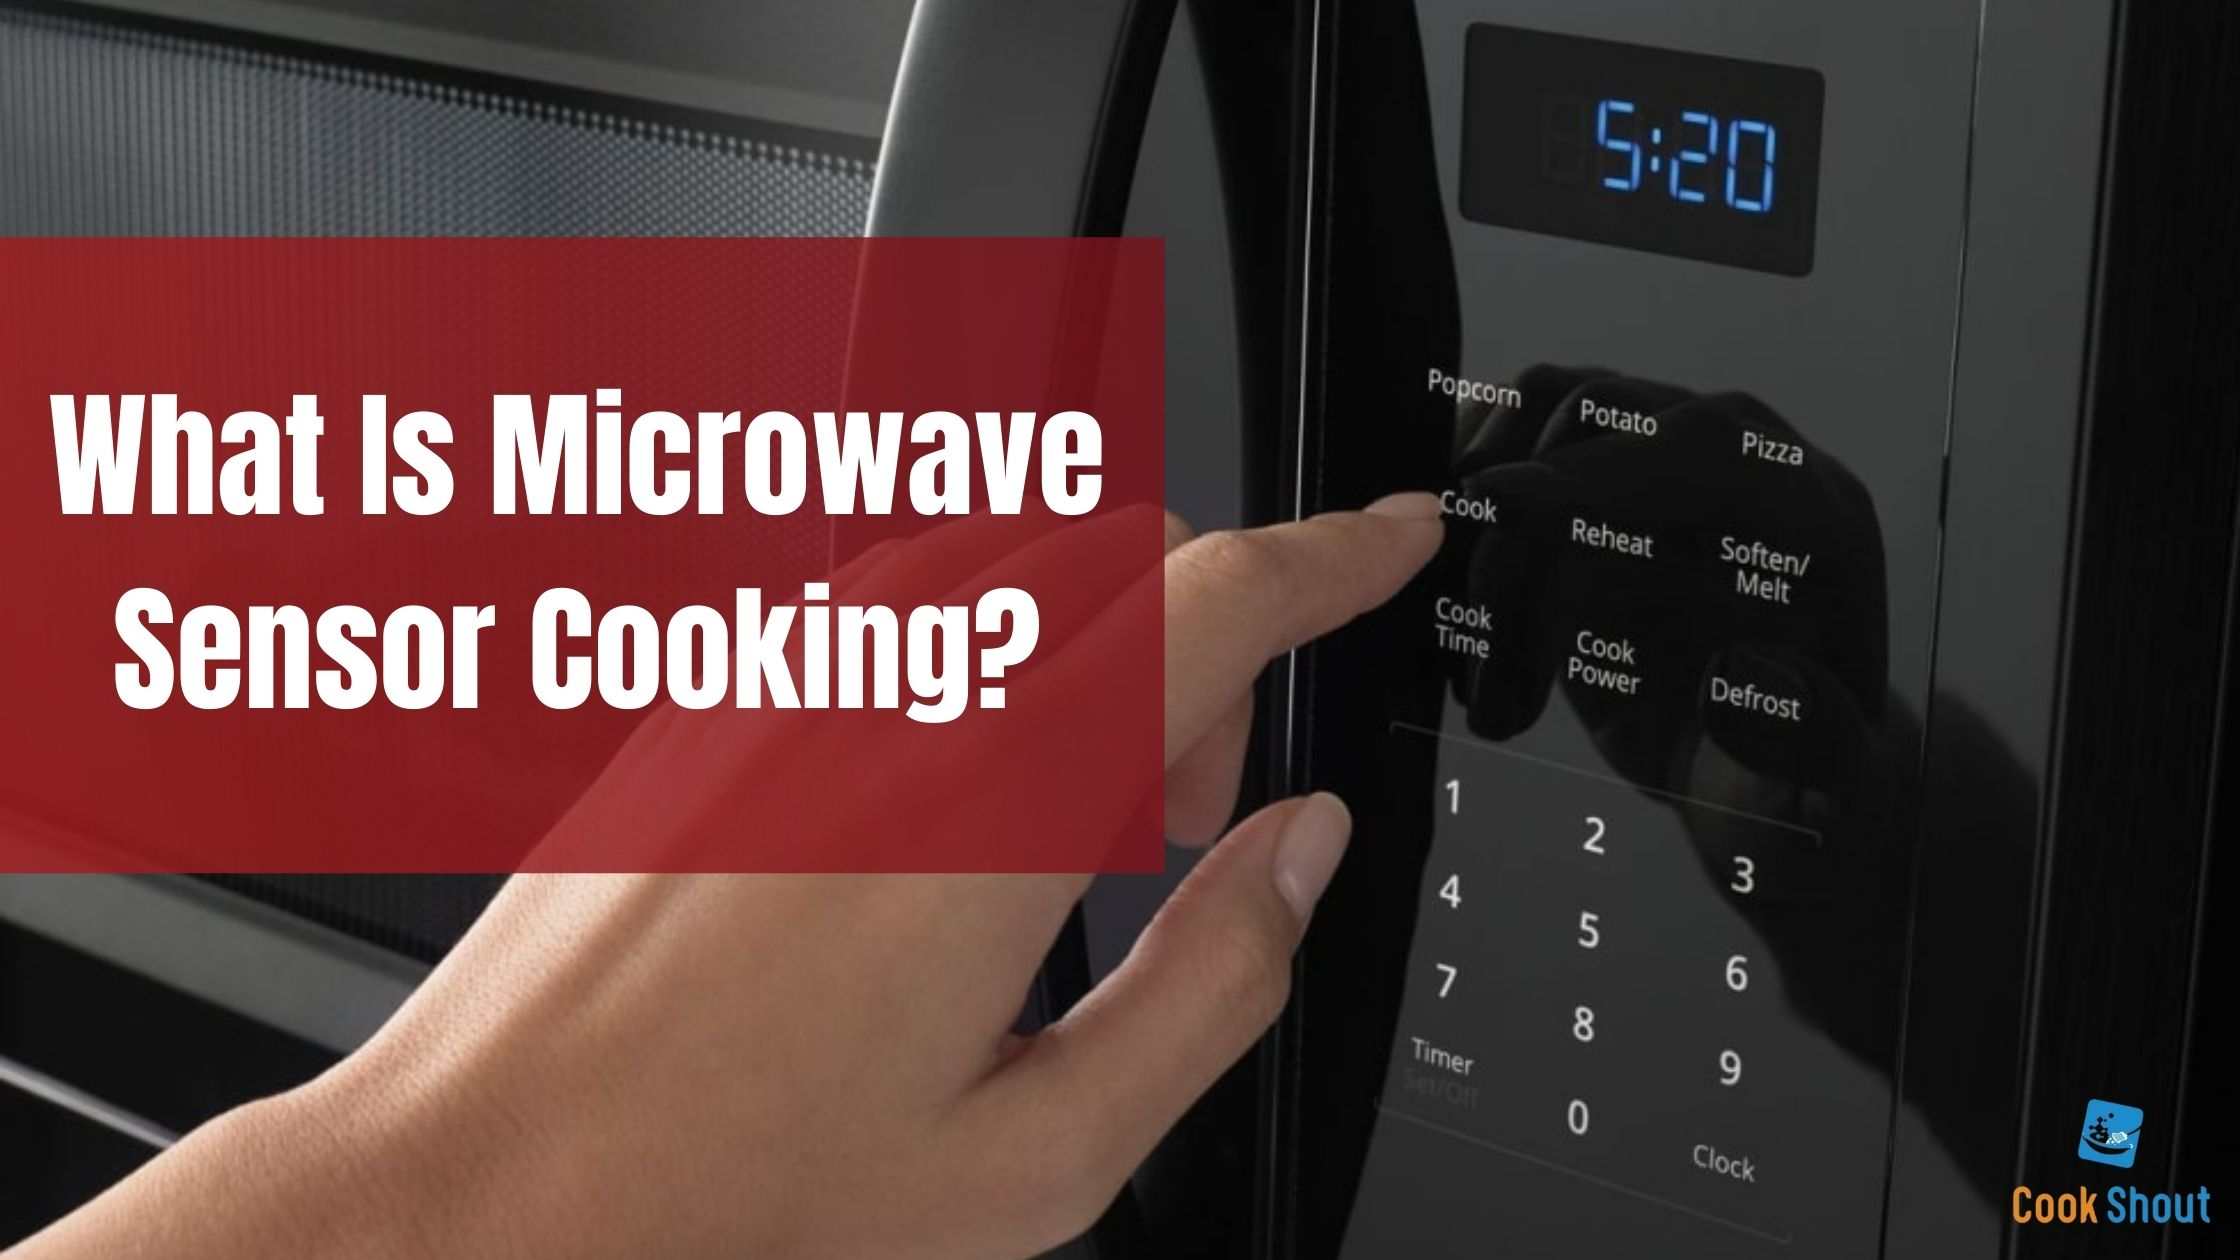 What Is Microwave Sensor Cooking?